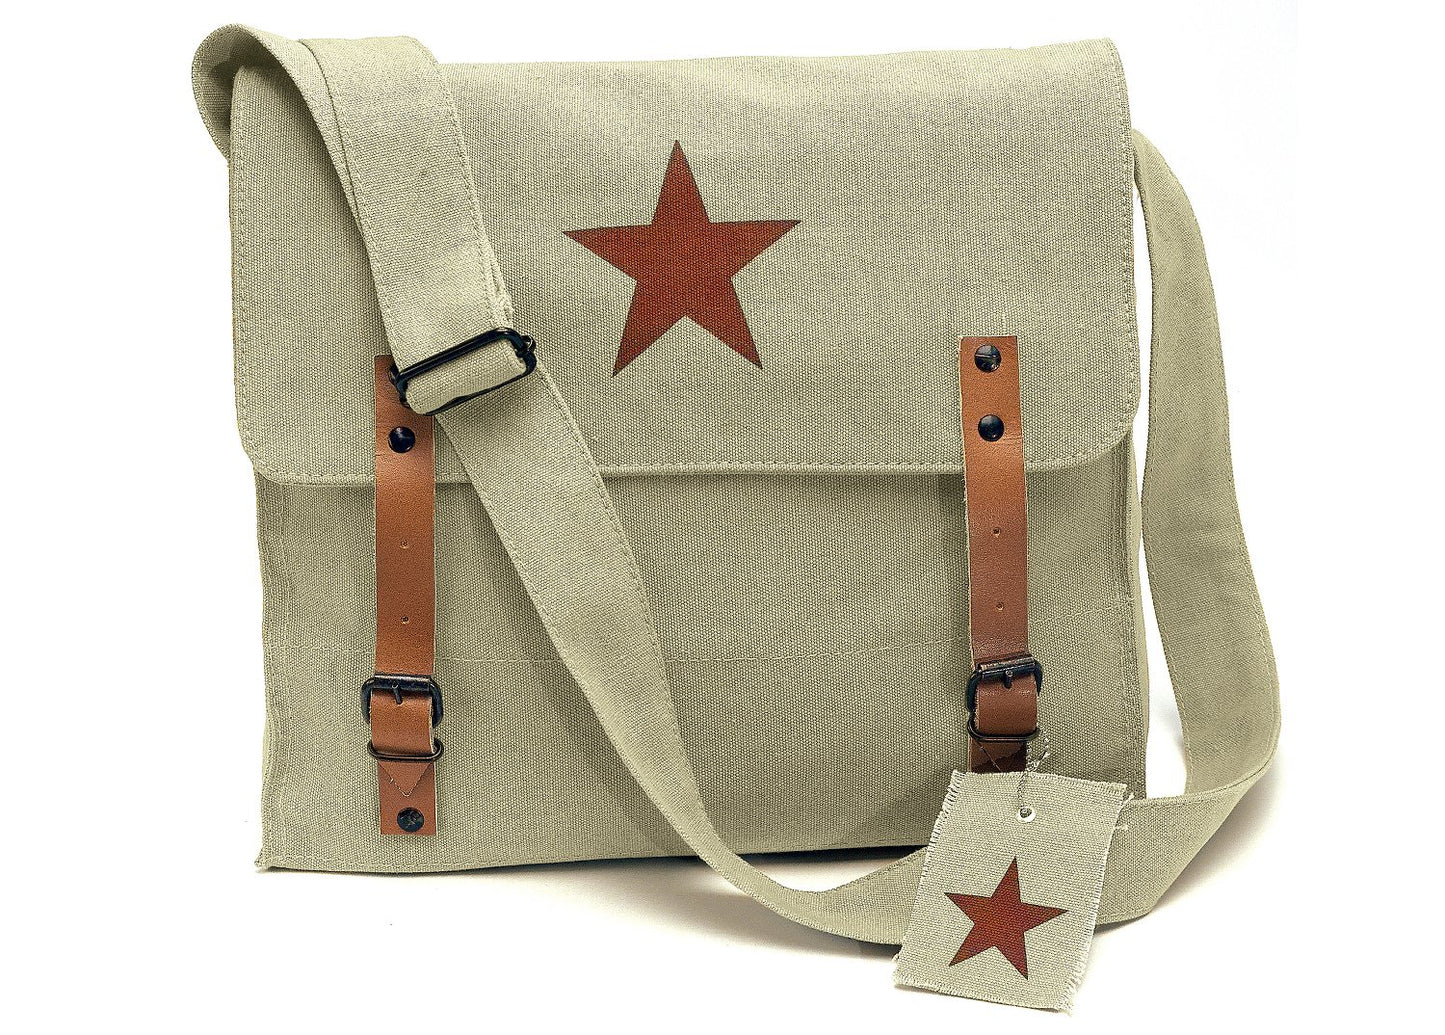 Canvas Classic Bag with Medic Star